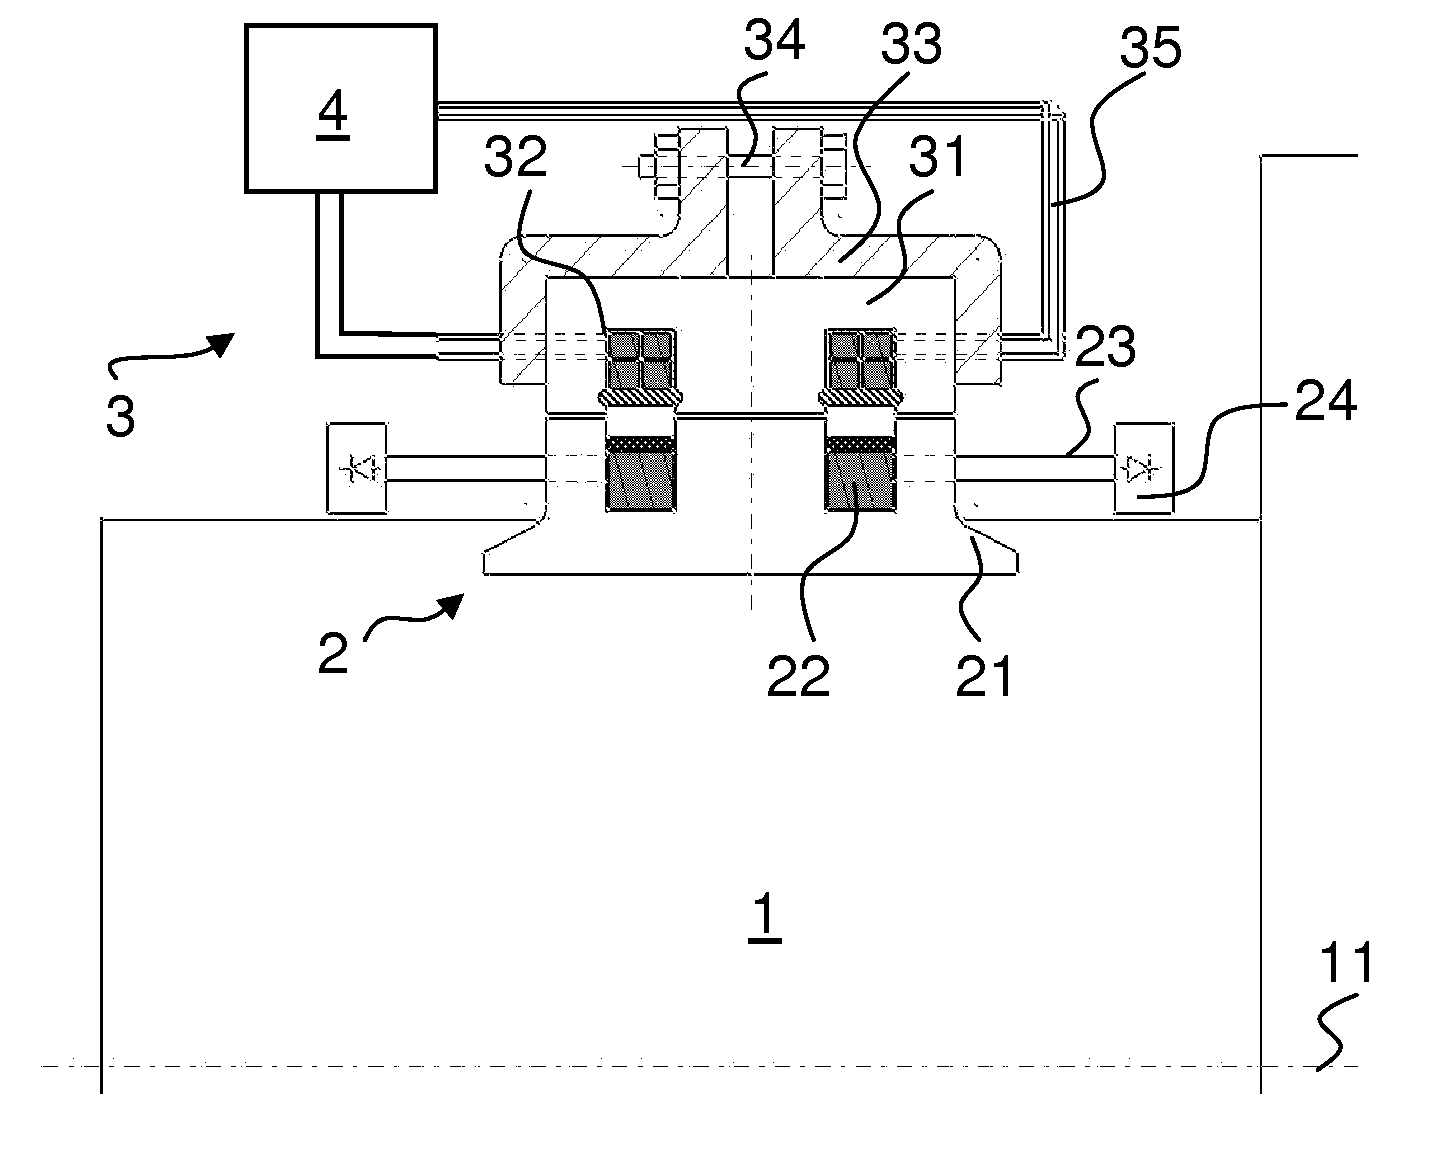 Rotating transformer for supplying the field winding in a dynamoelectric machine